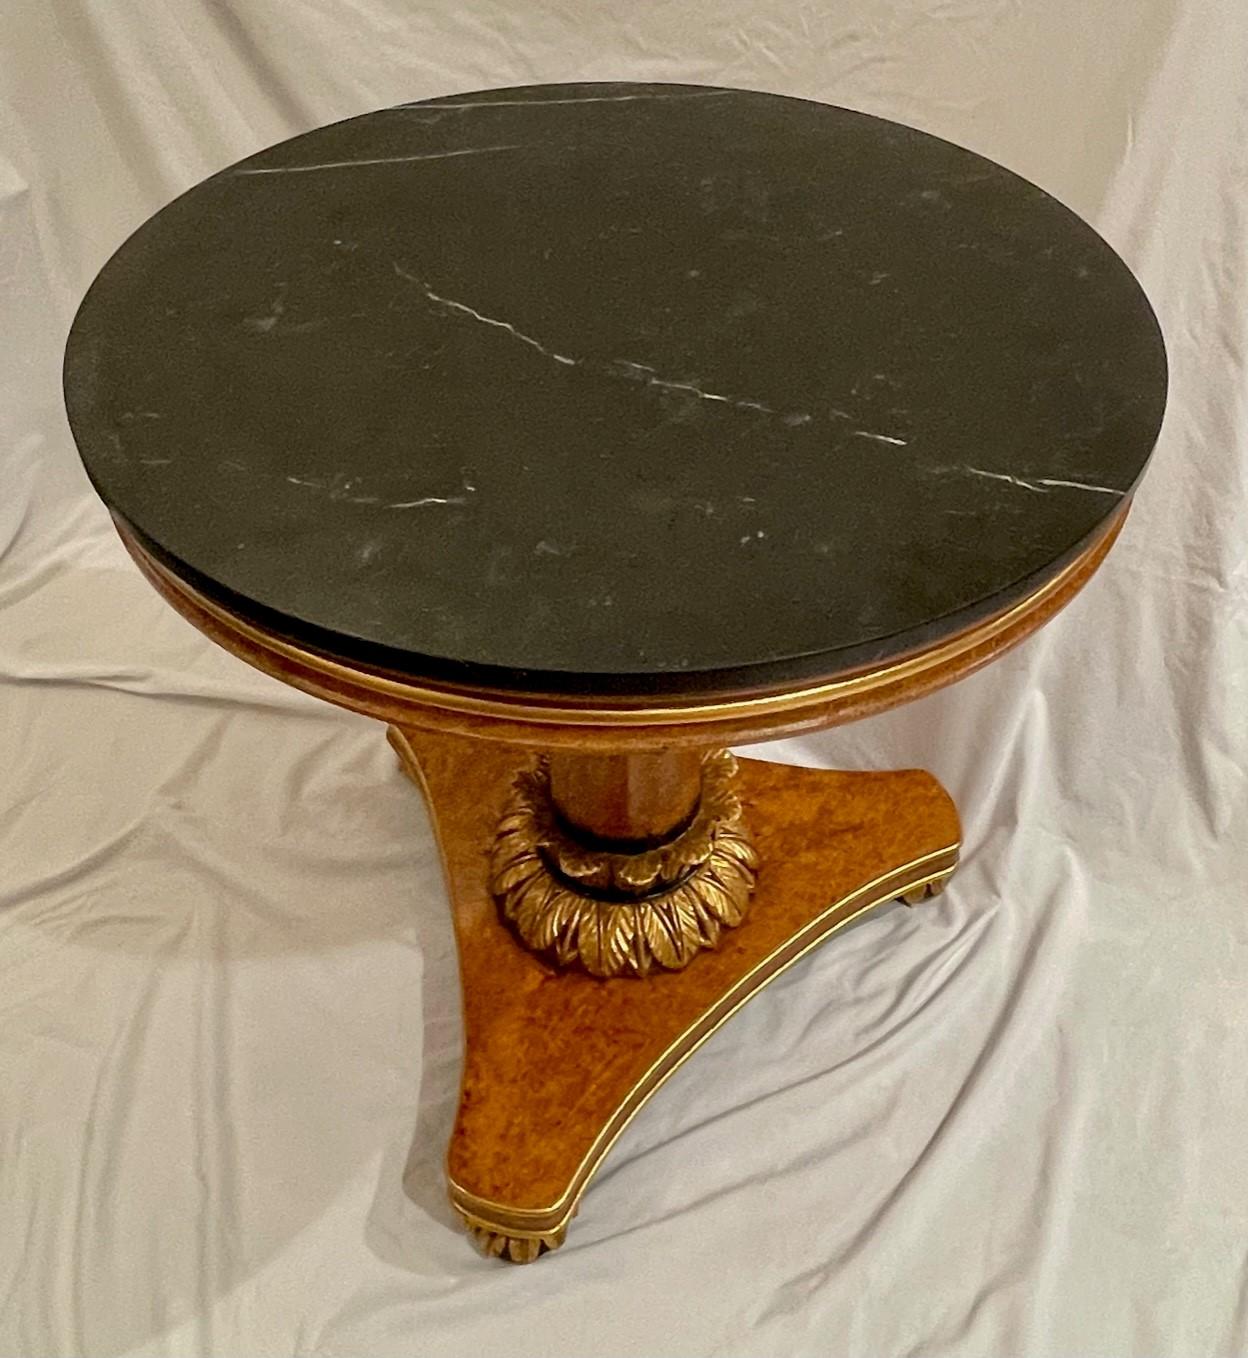 Contemporary Biedermeier Table Carved Giltwood Marquina Marble Top Invitinghome For Sale